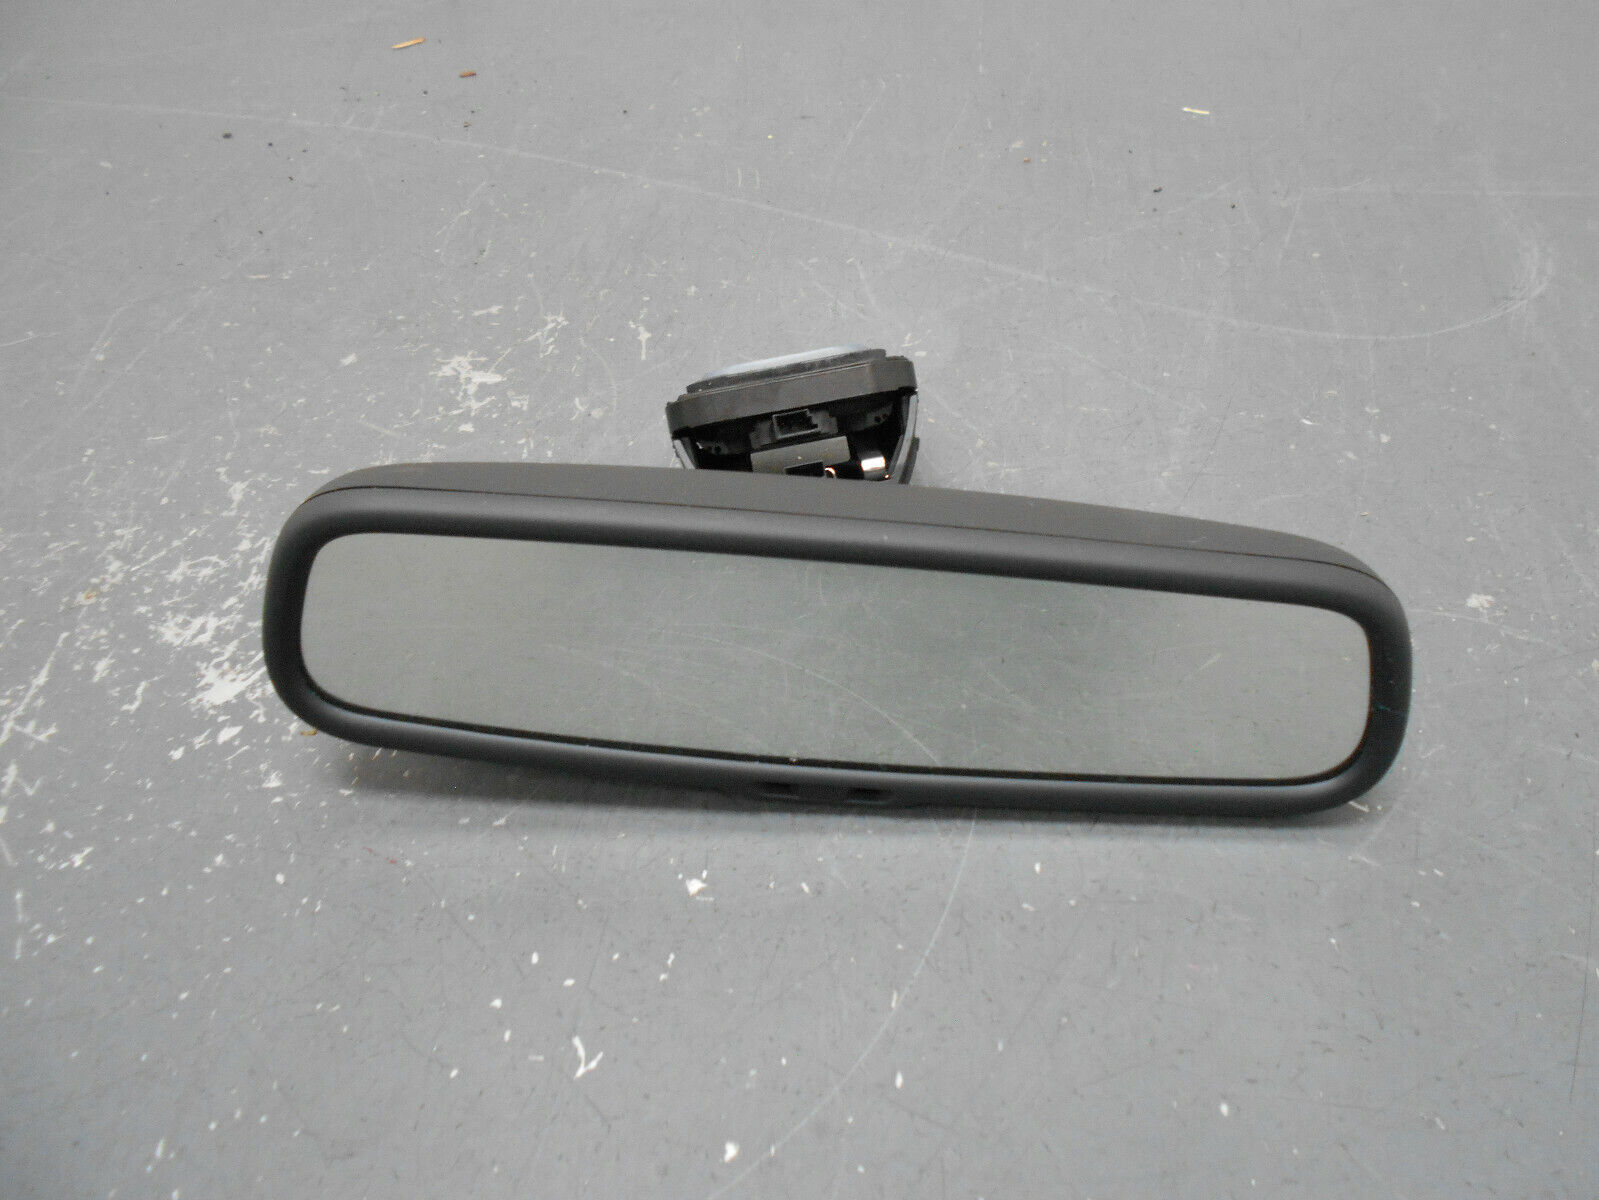 2010 09 10 11 Bentley Continental SuperSports Auto Dim Rearview Mirror #4047 B6